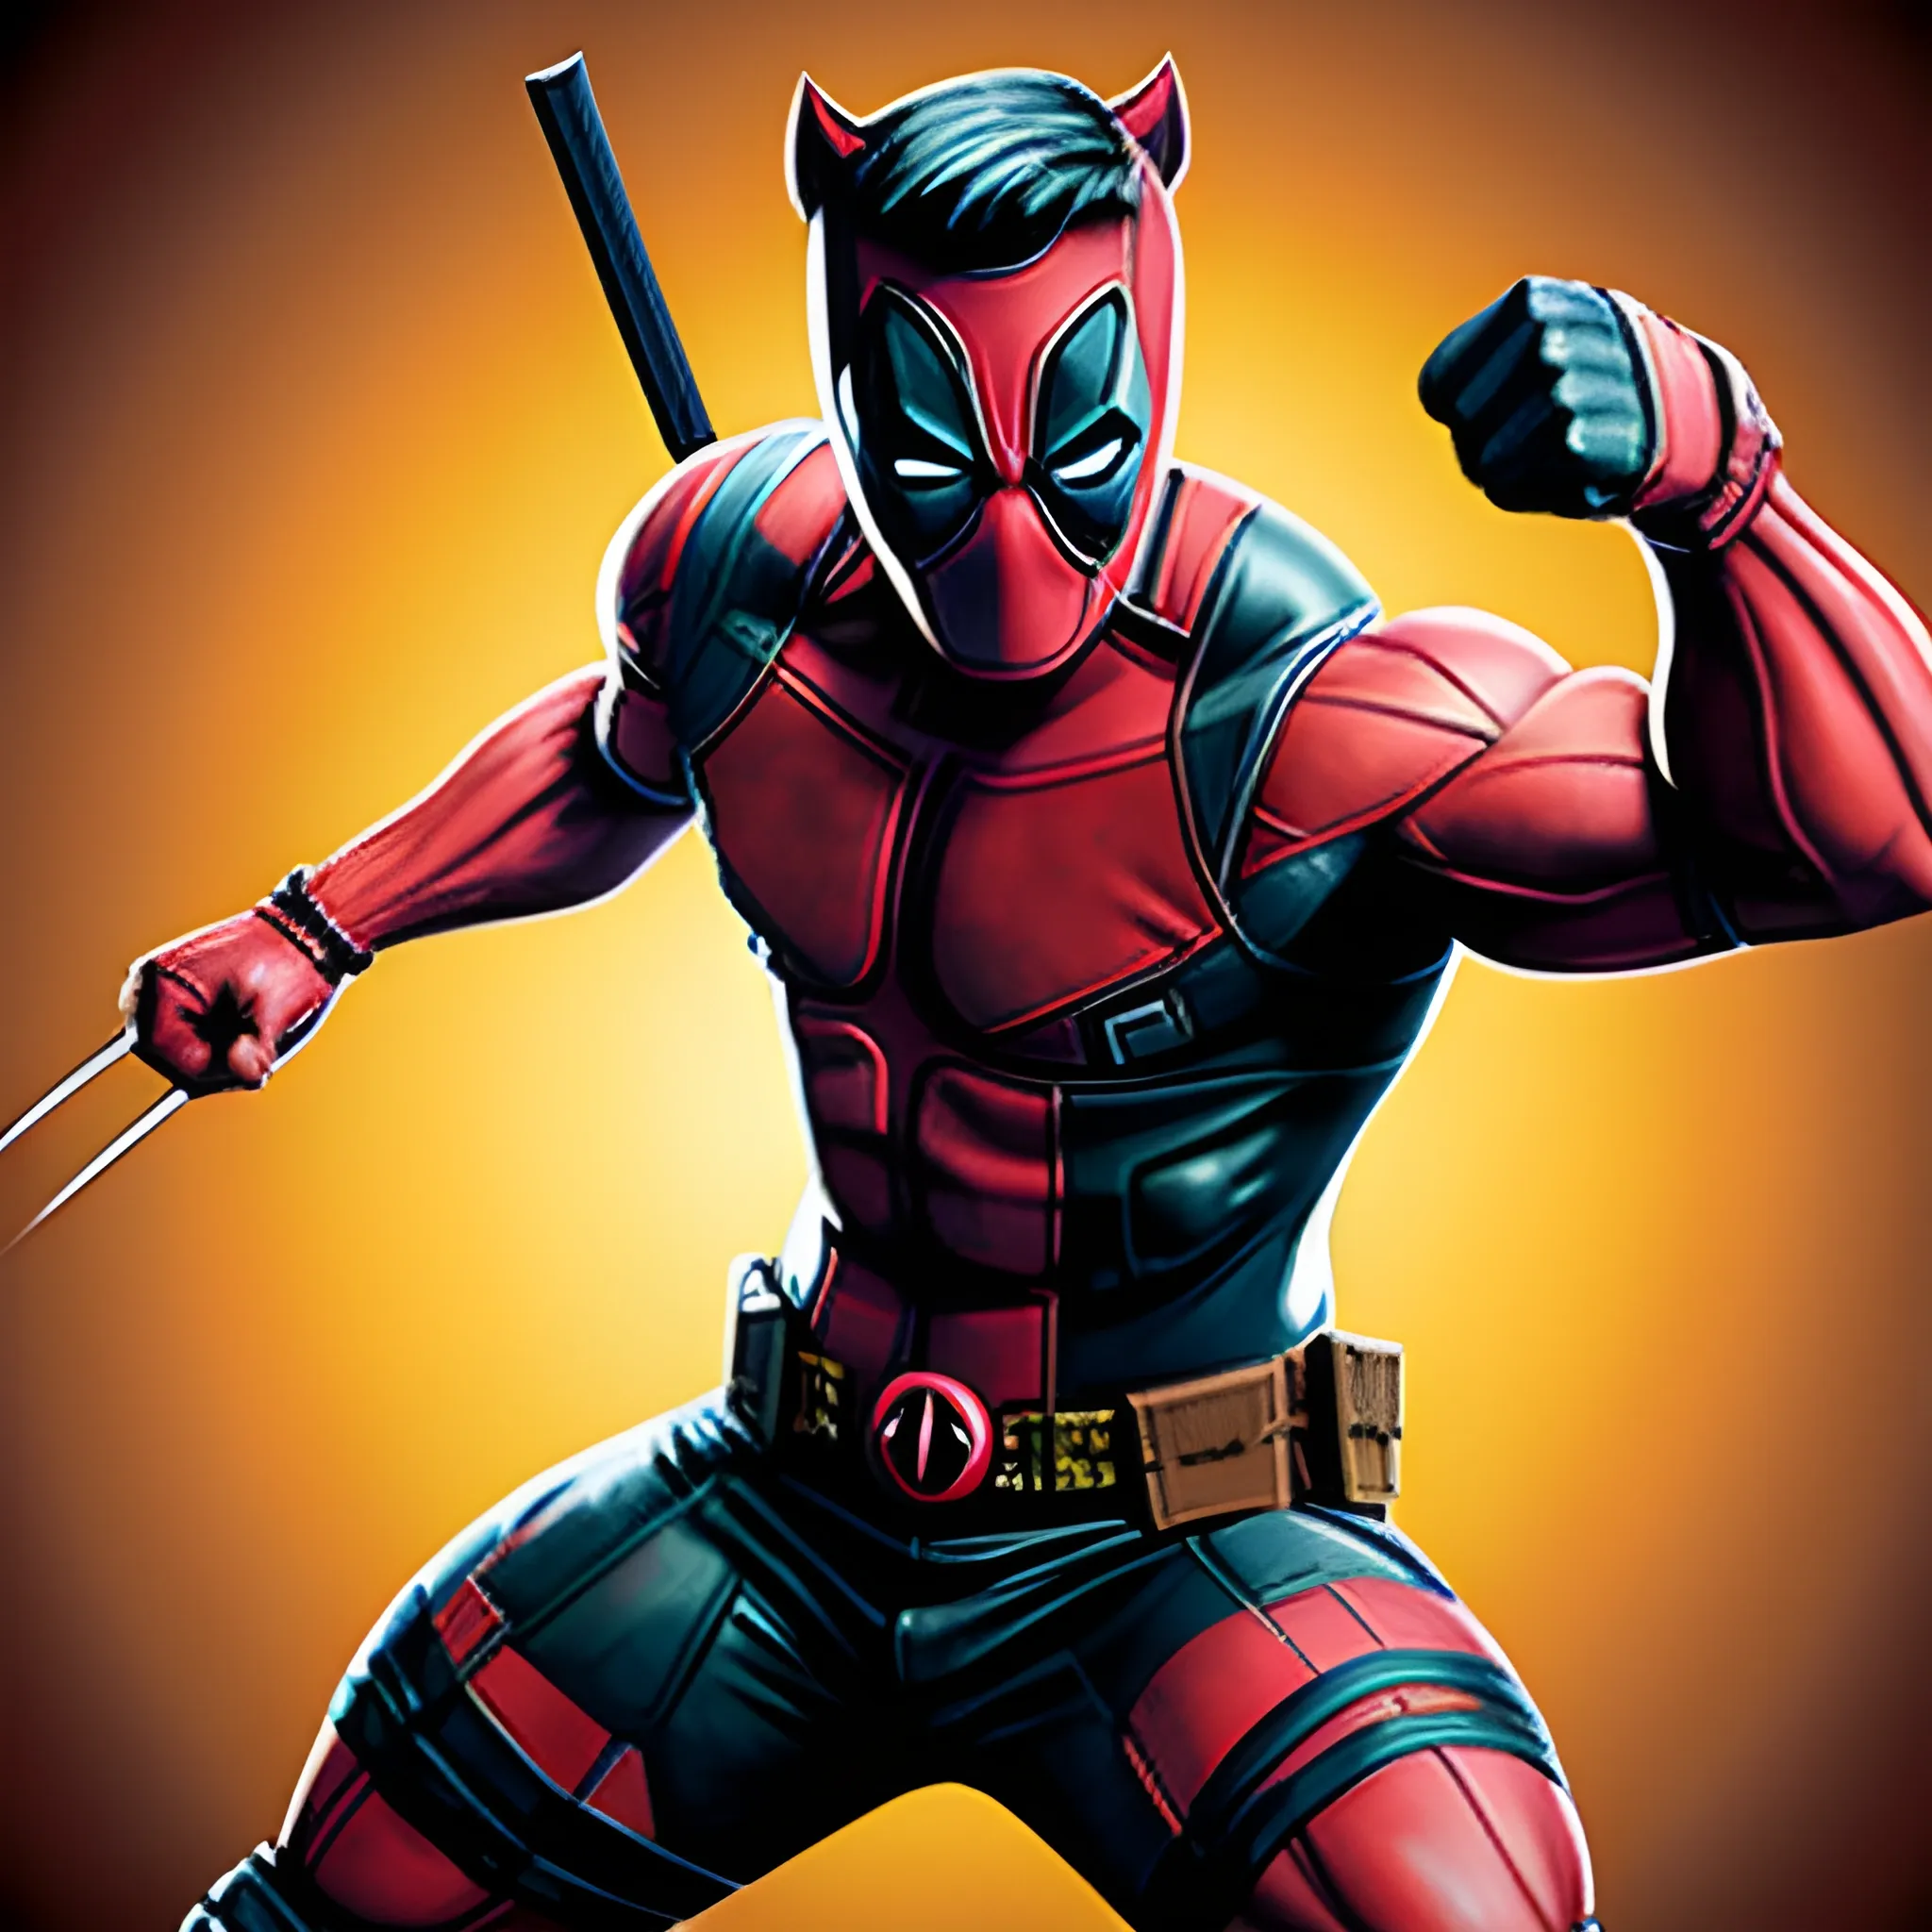 Hugh Jackman as Wolverine fighthing with deadpool,  anime style, 3D